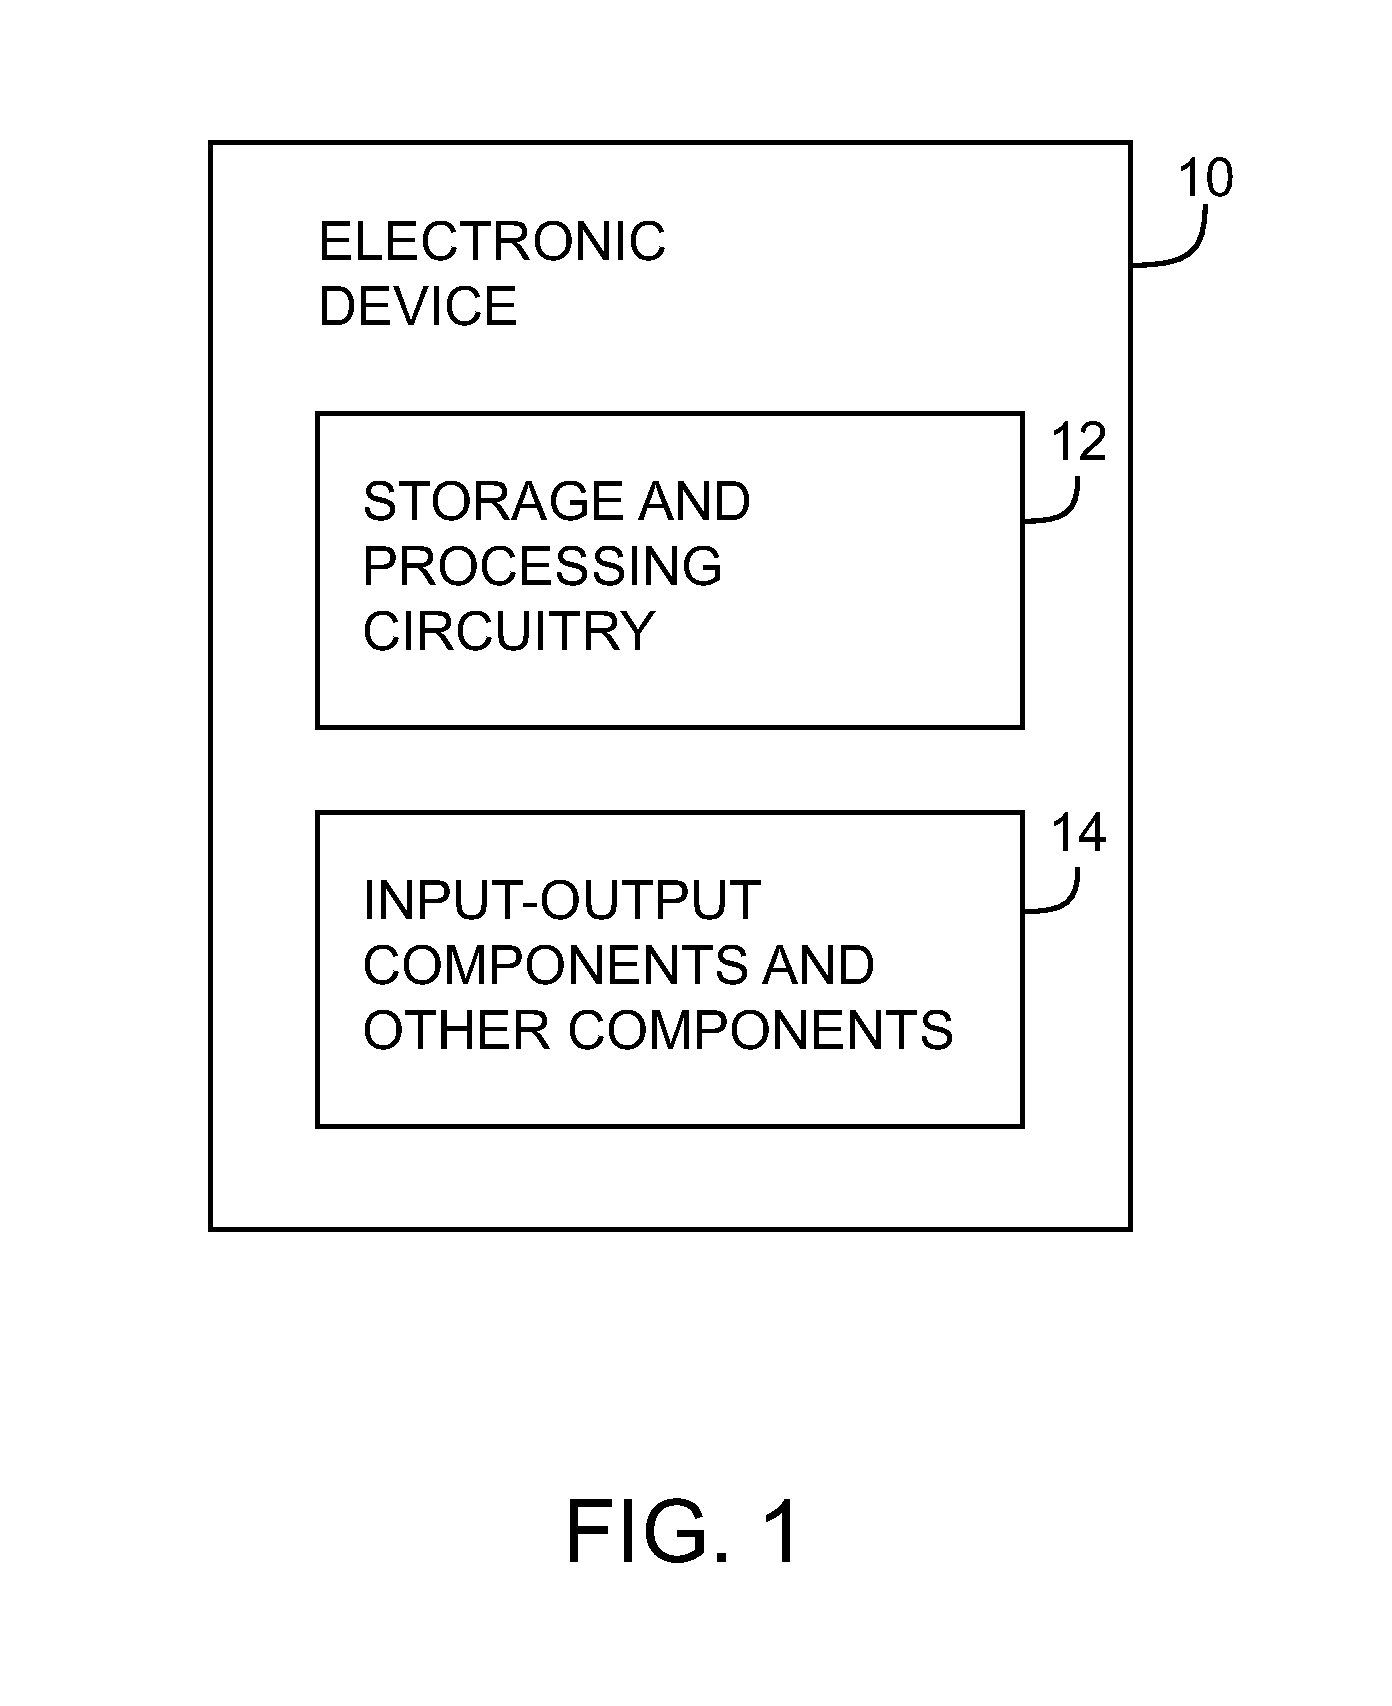 Electronic subassemblies for electronic devices